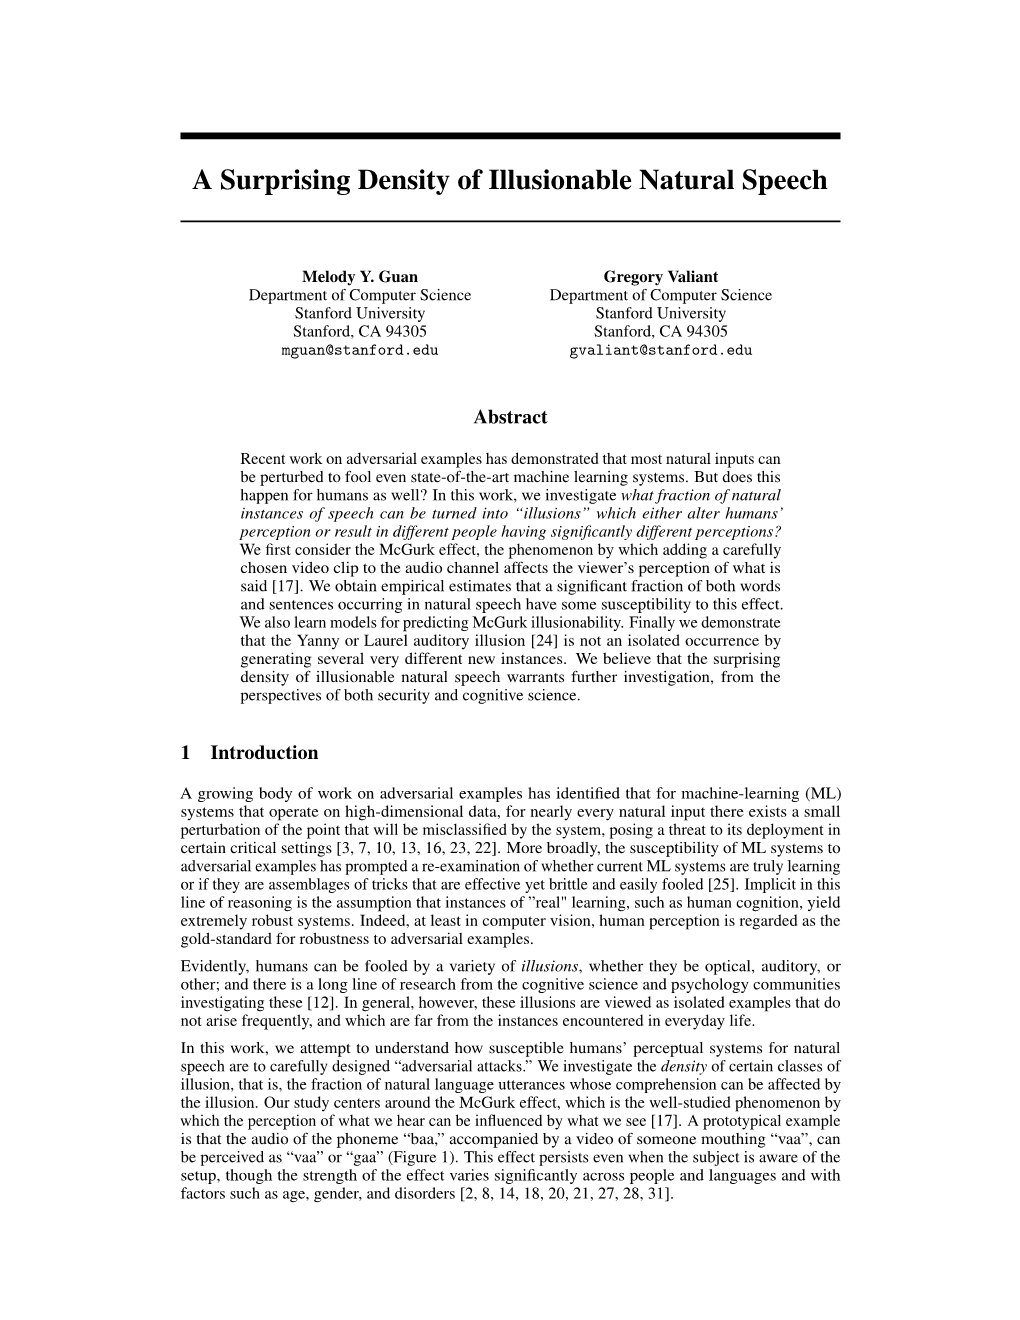 A Surprising Density of Illusionable Natural Speech